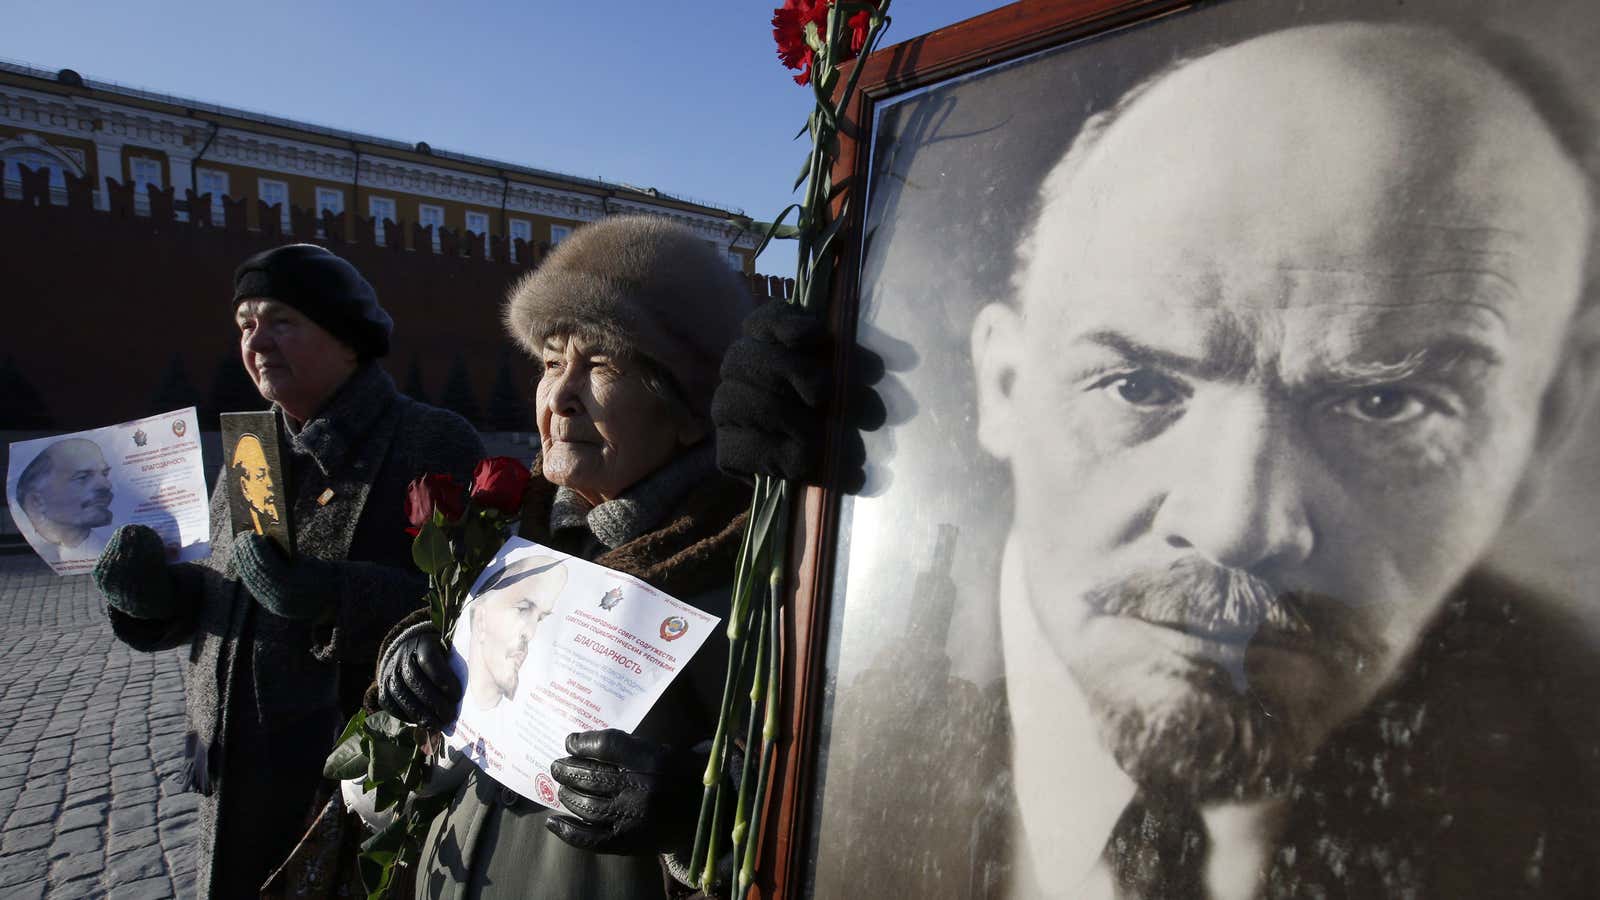 Russia has more than 5,000 streets named for Lenin, and one named for Putin